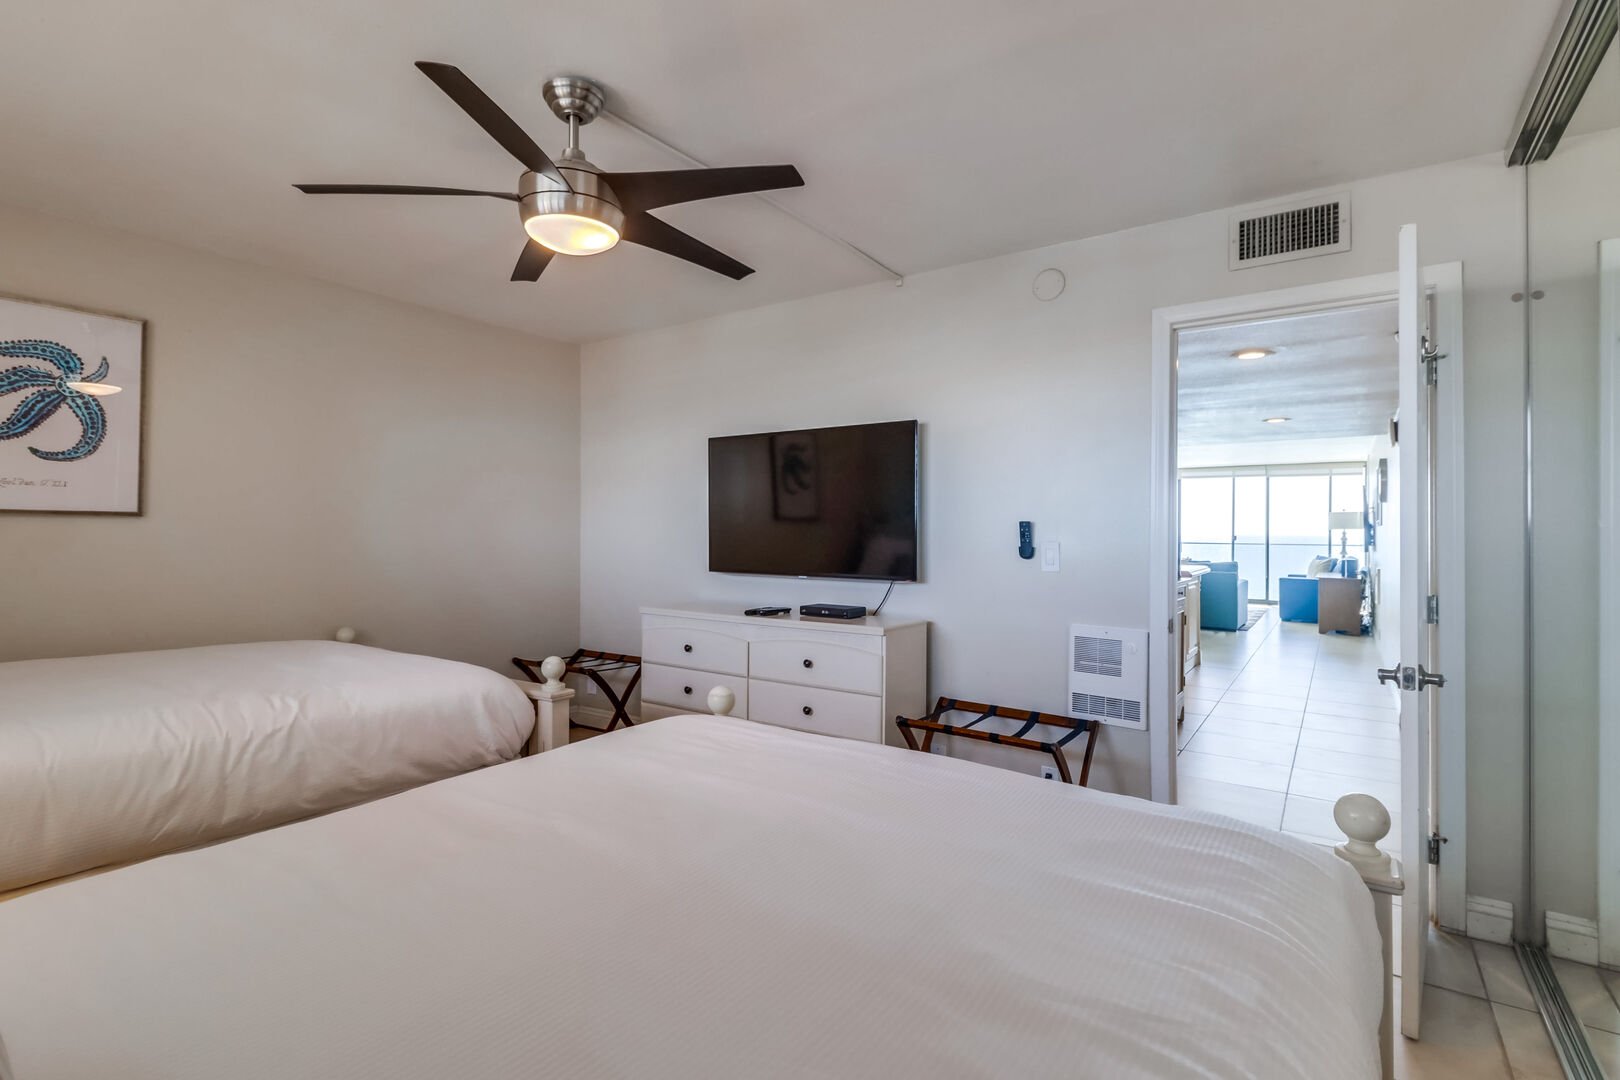 The back bedroom has 2 queen size beds, luggage racks, ceiling fan, star TV and dresser storage